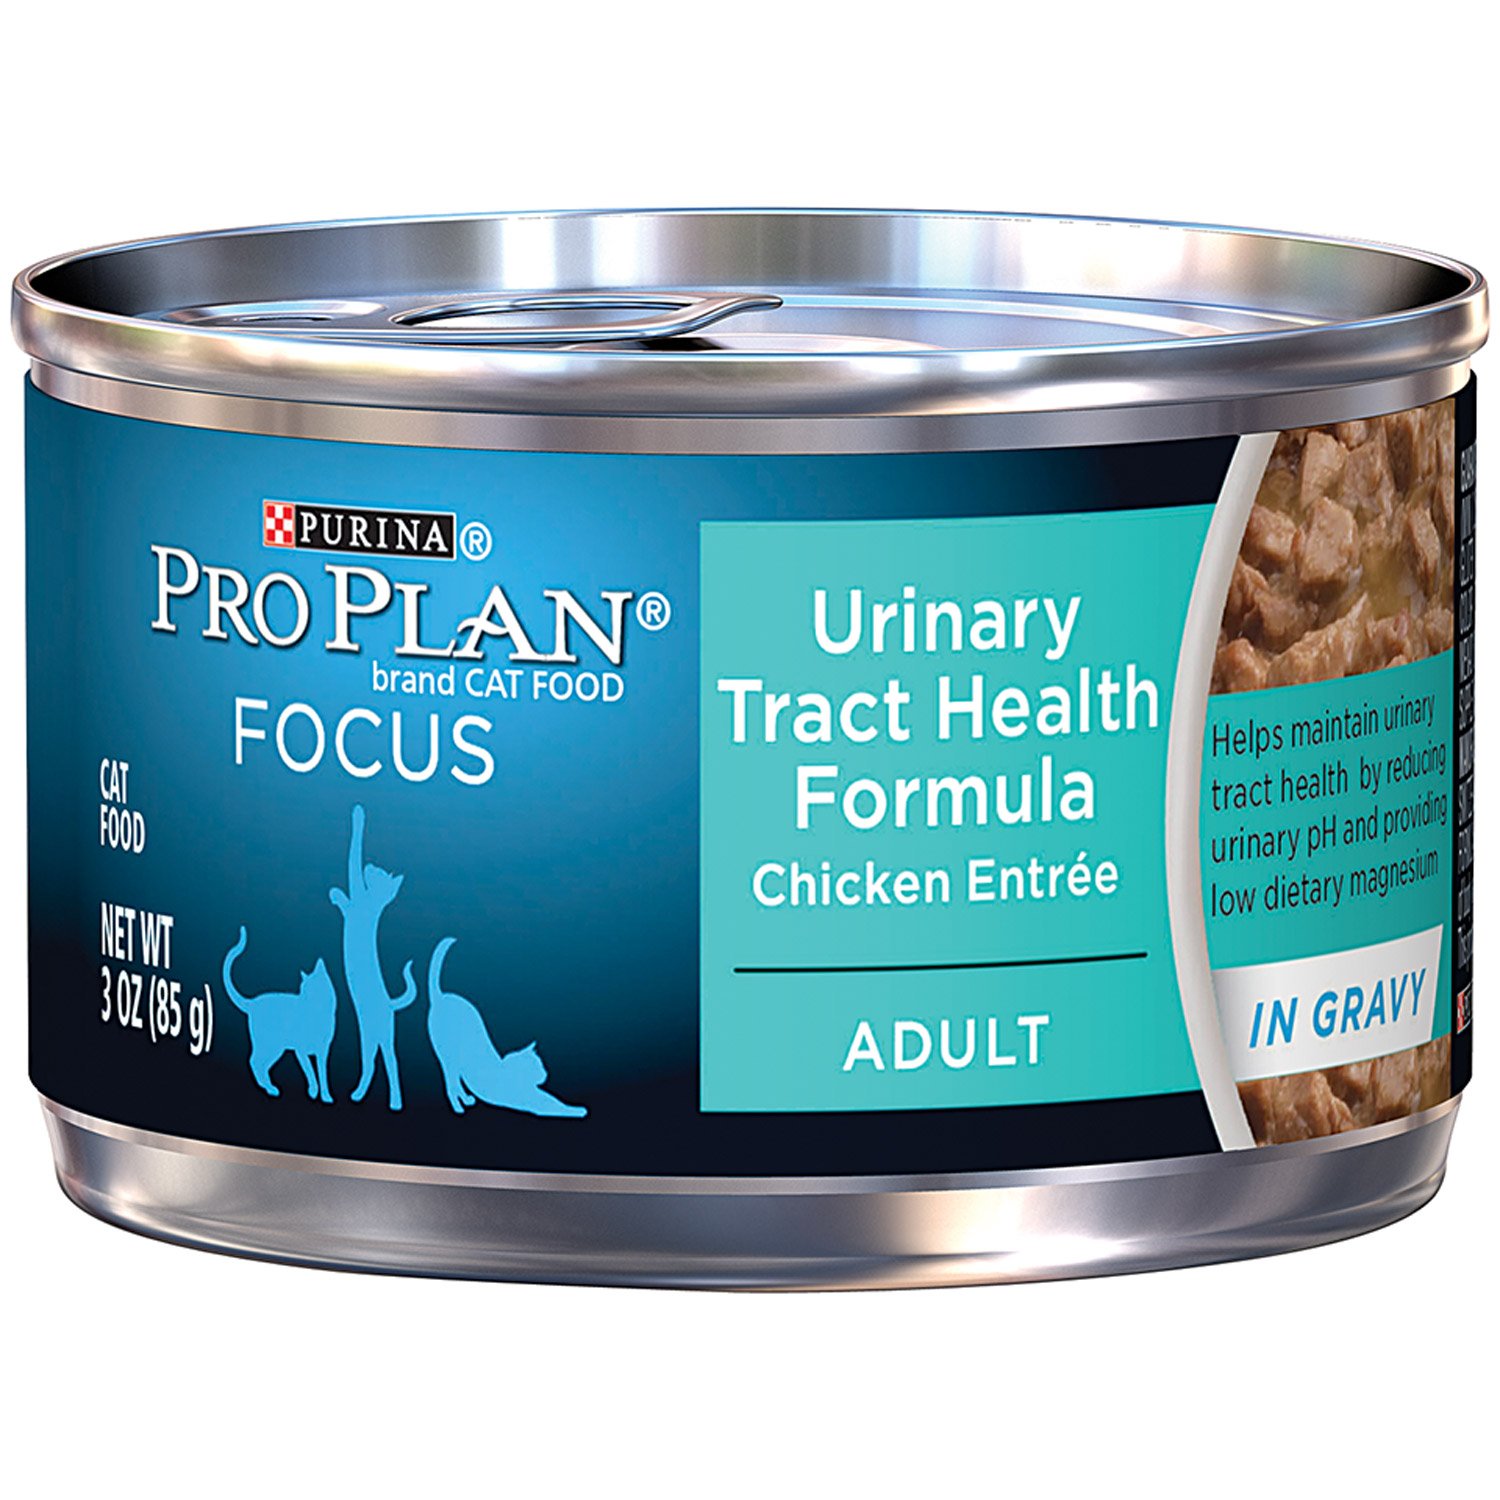 Pro Plan Focus Urinary Tract Health Canned Cat Food Petco